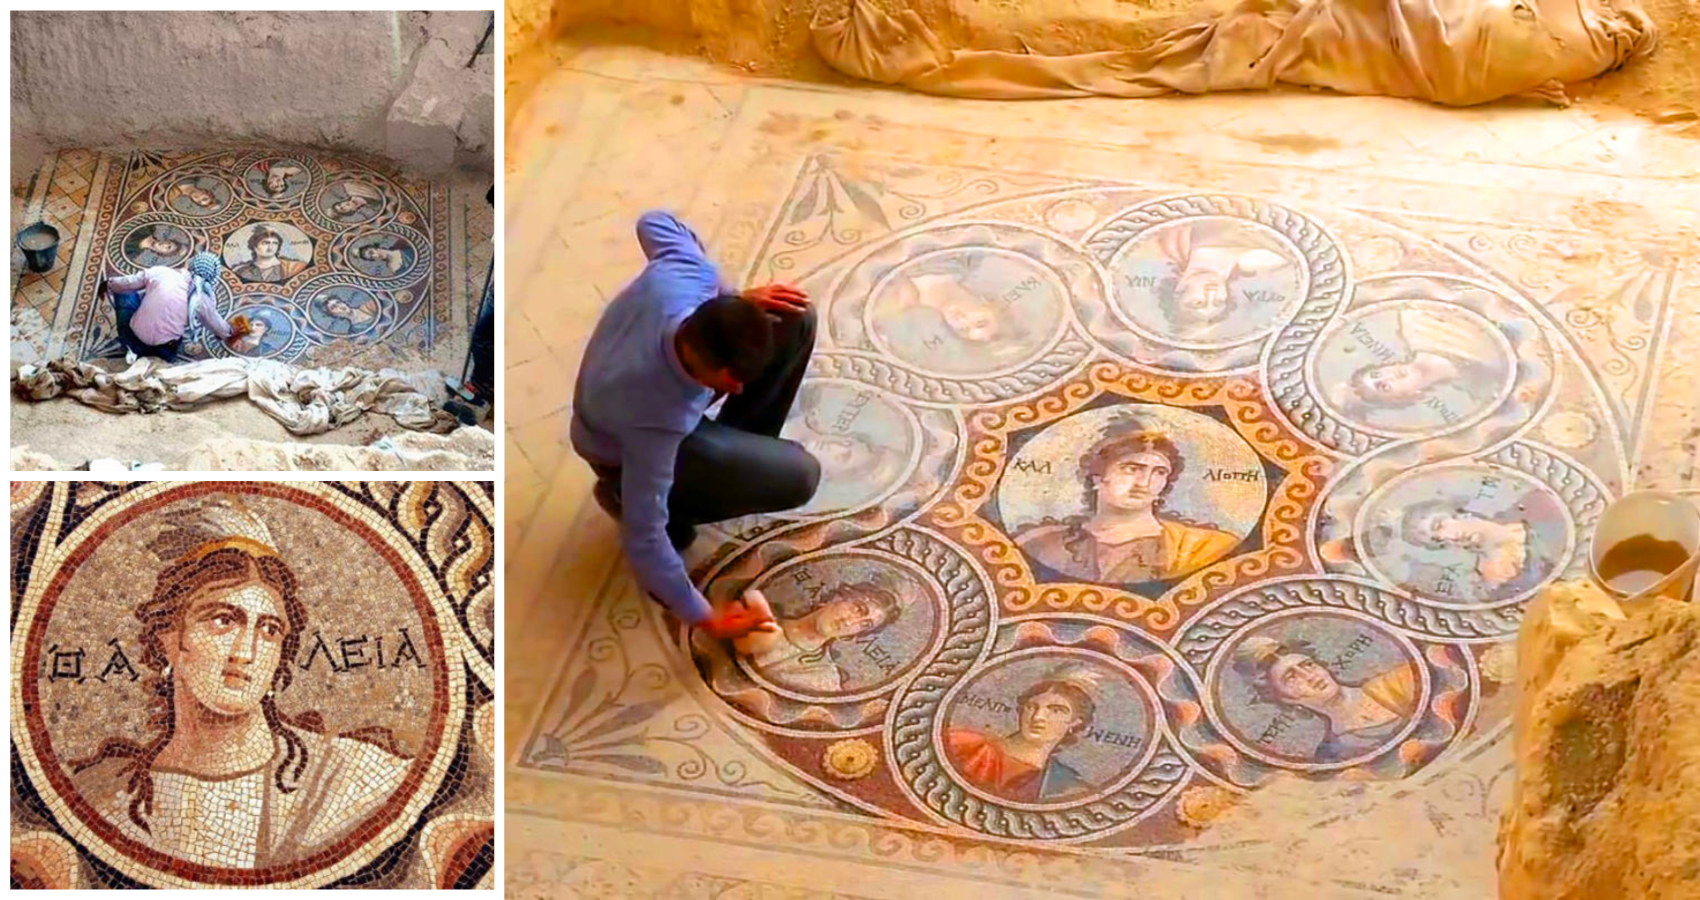 2,000-Year-Old Mosaics Miraculously Saved from Destructive Flooding